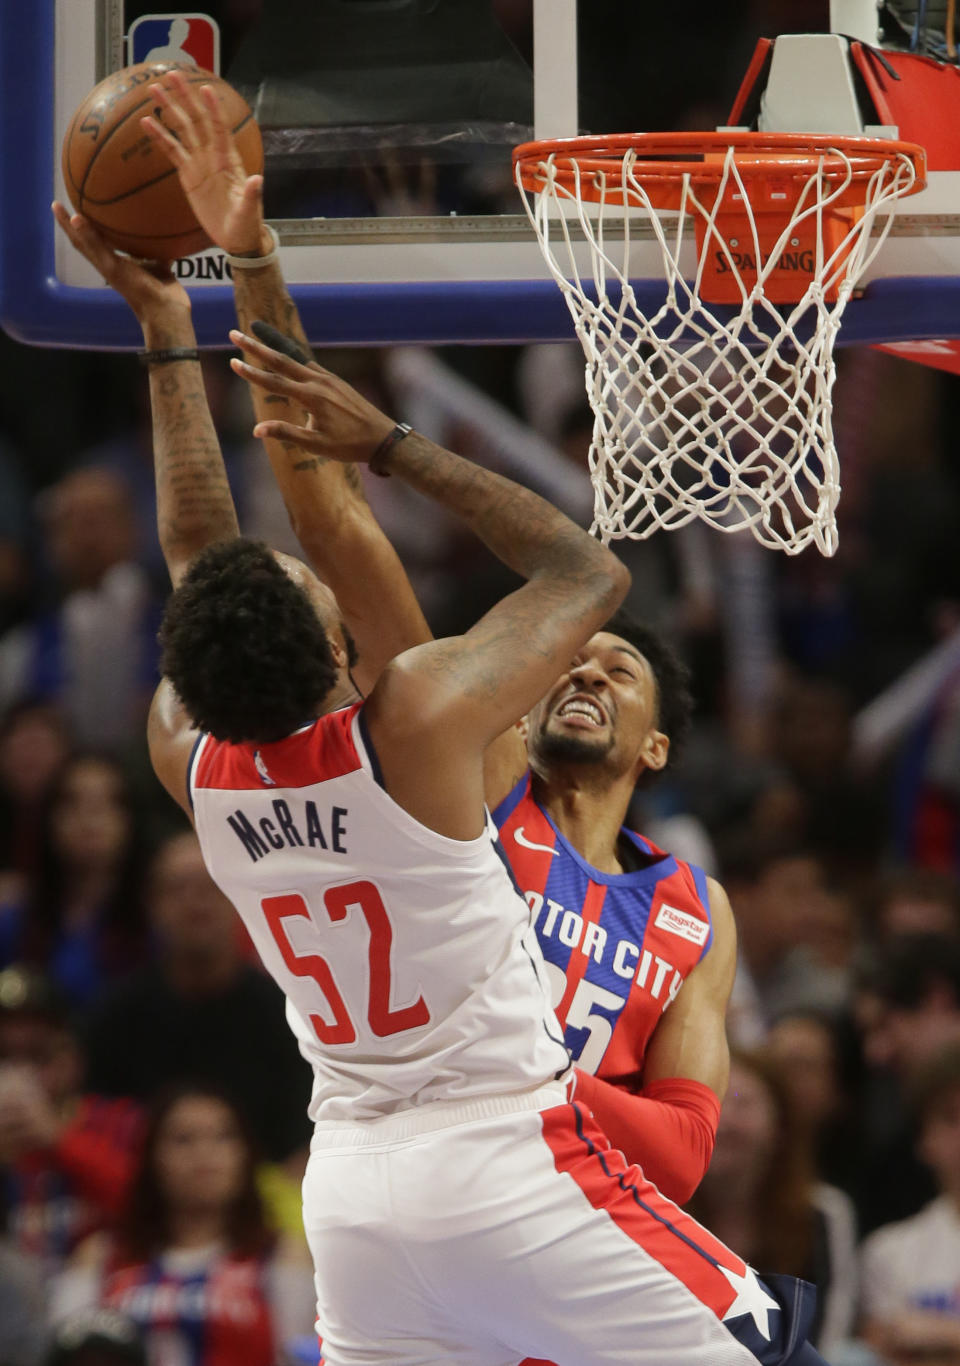 Detroit Pistons forward Christian Wood, right, defends against a shot by Washington Wizards guard Jordan McRae (52) during the first half of an NBA basketball game Thursday, Dec. 26, 2019, in Detroit. (AP Photo/Duane Burleson)